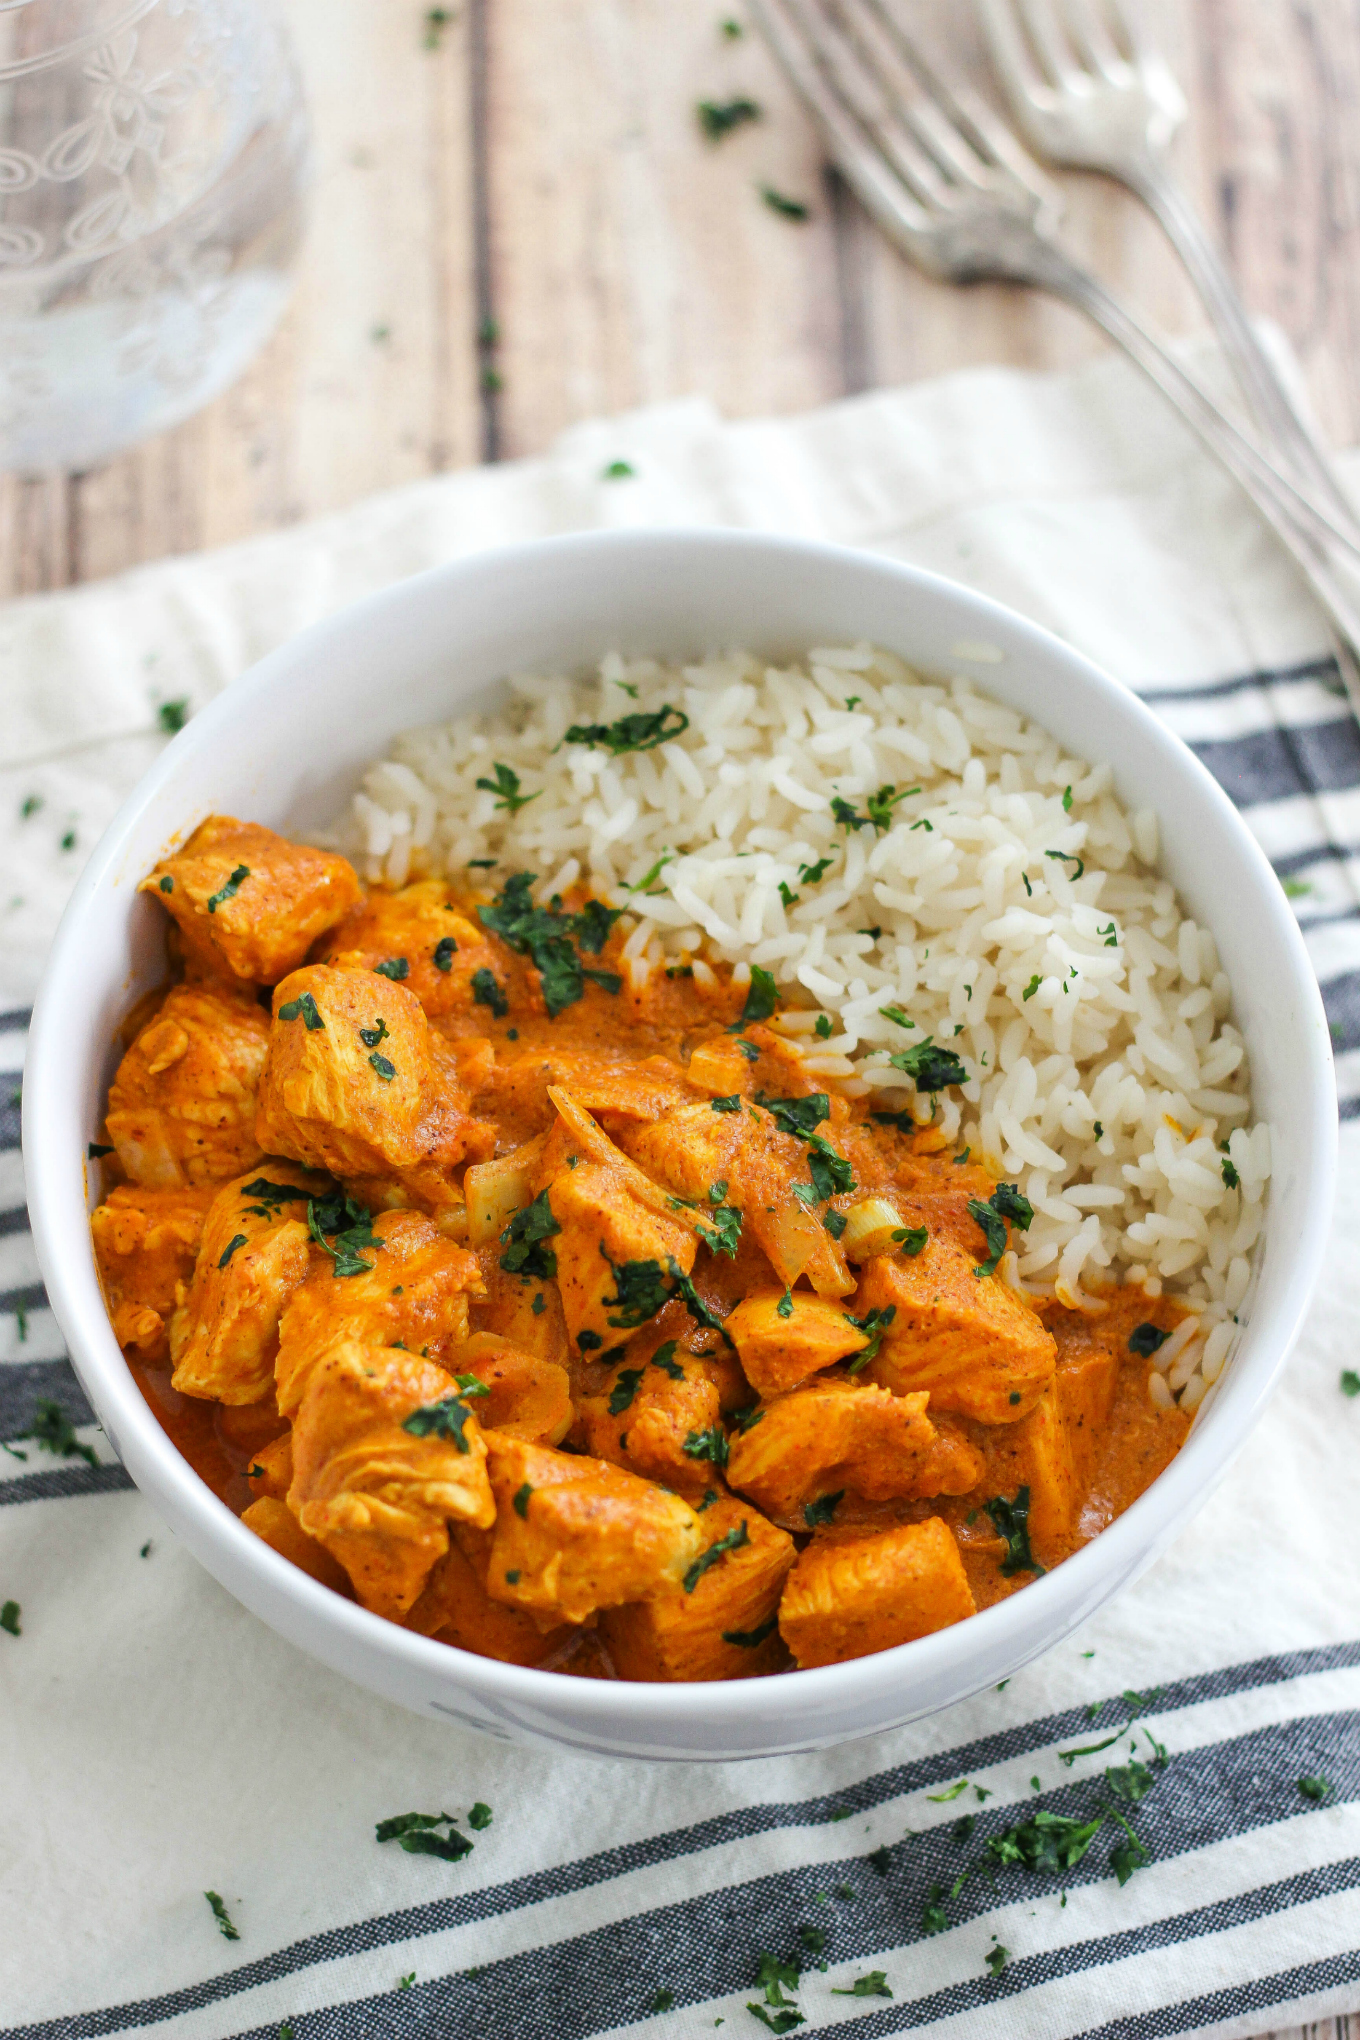 Easy Slow Cooker Butter Chicken is a flavorful Indian chicken dish cooked in a coconut curry sauce and served with rice. This is a simple weeknight meal.